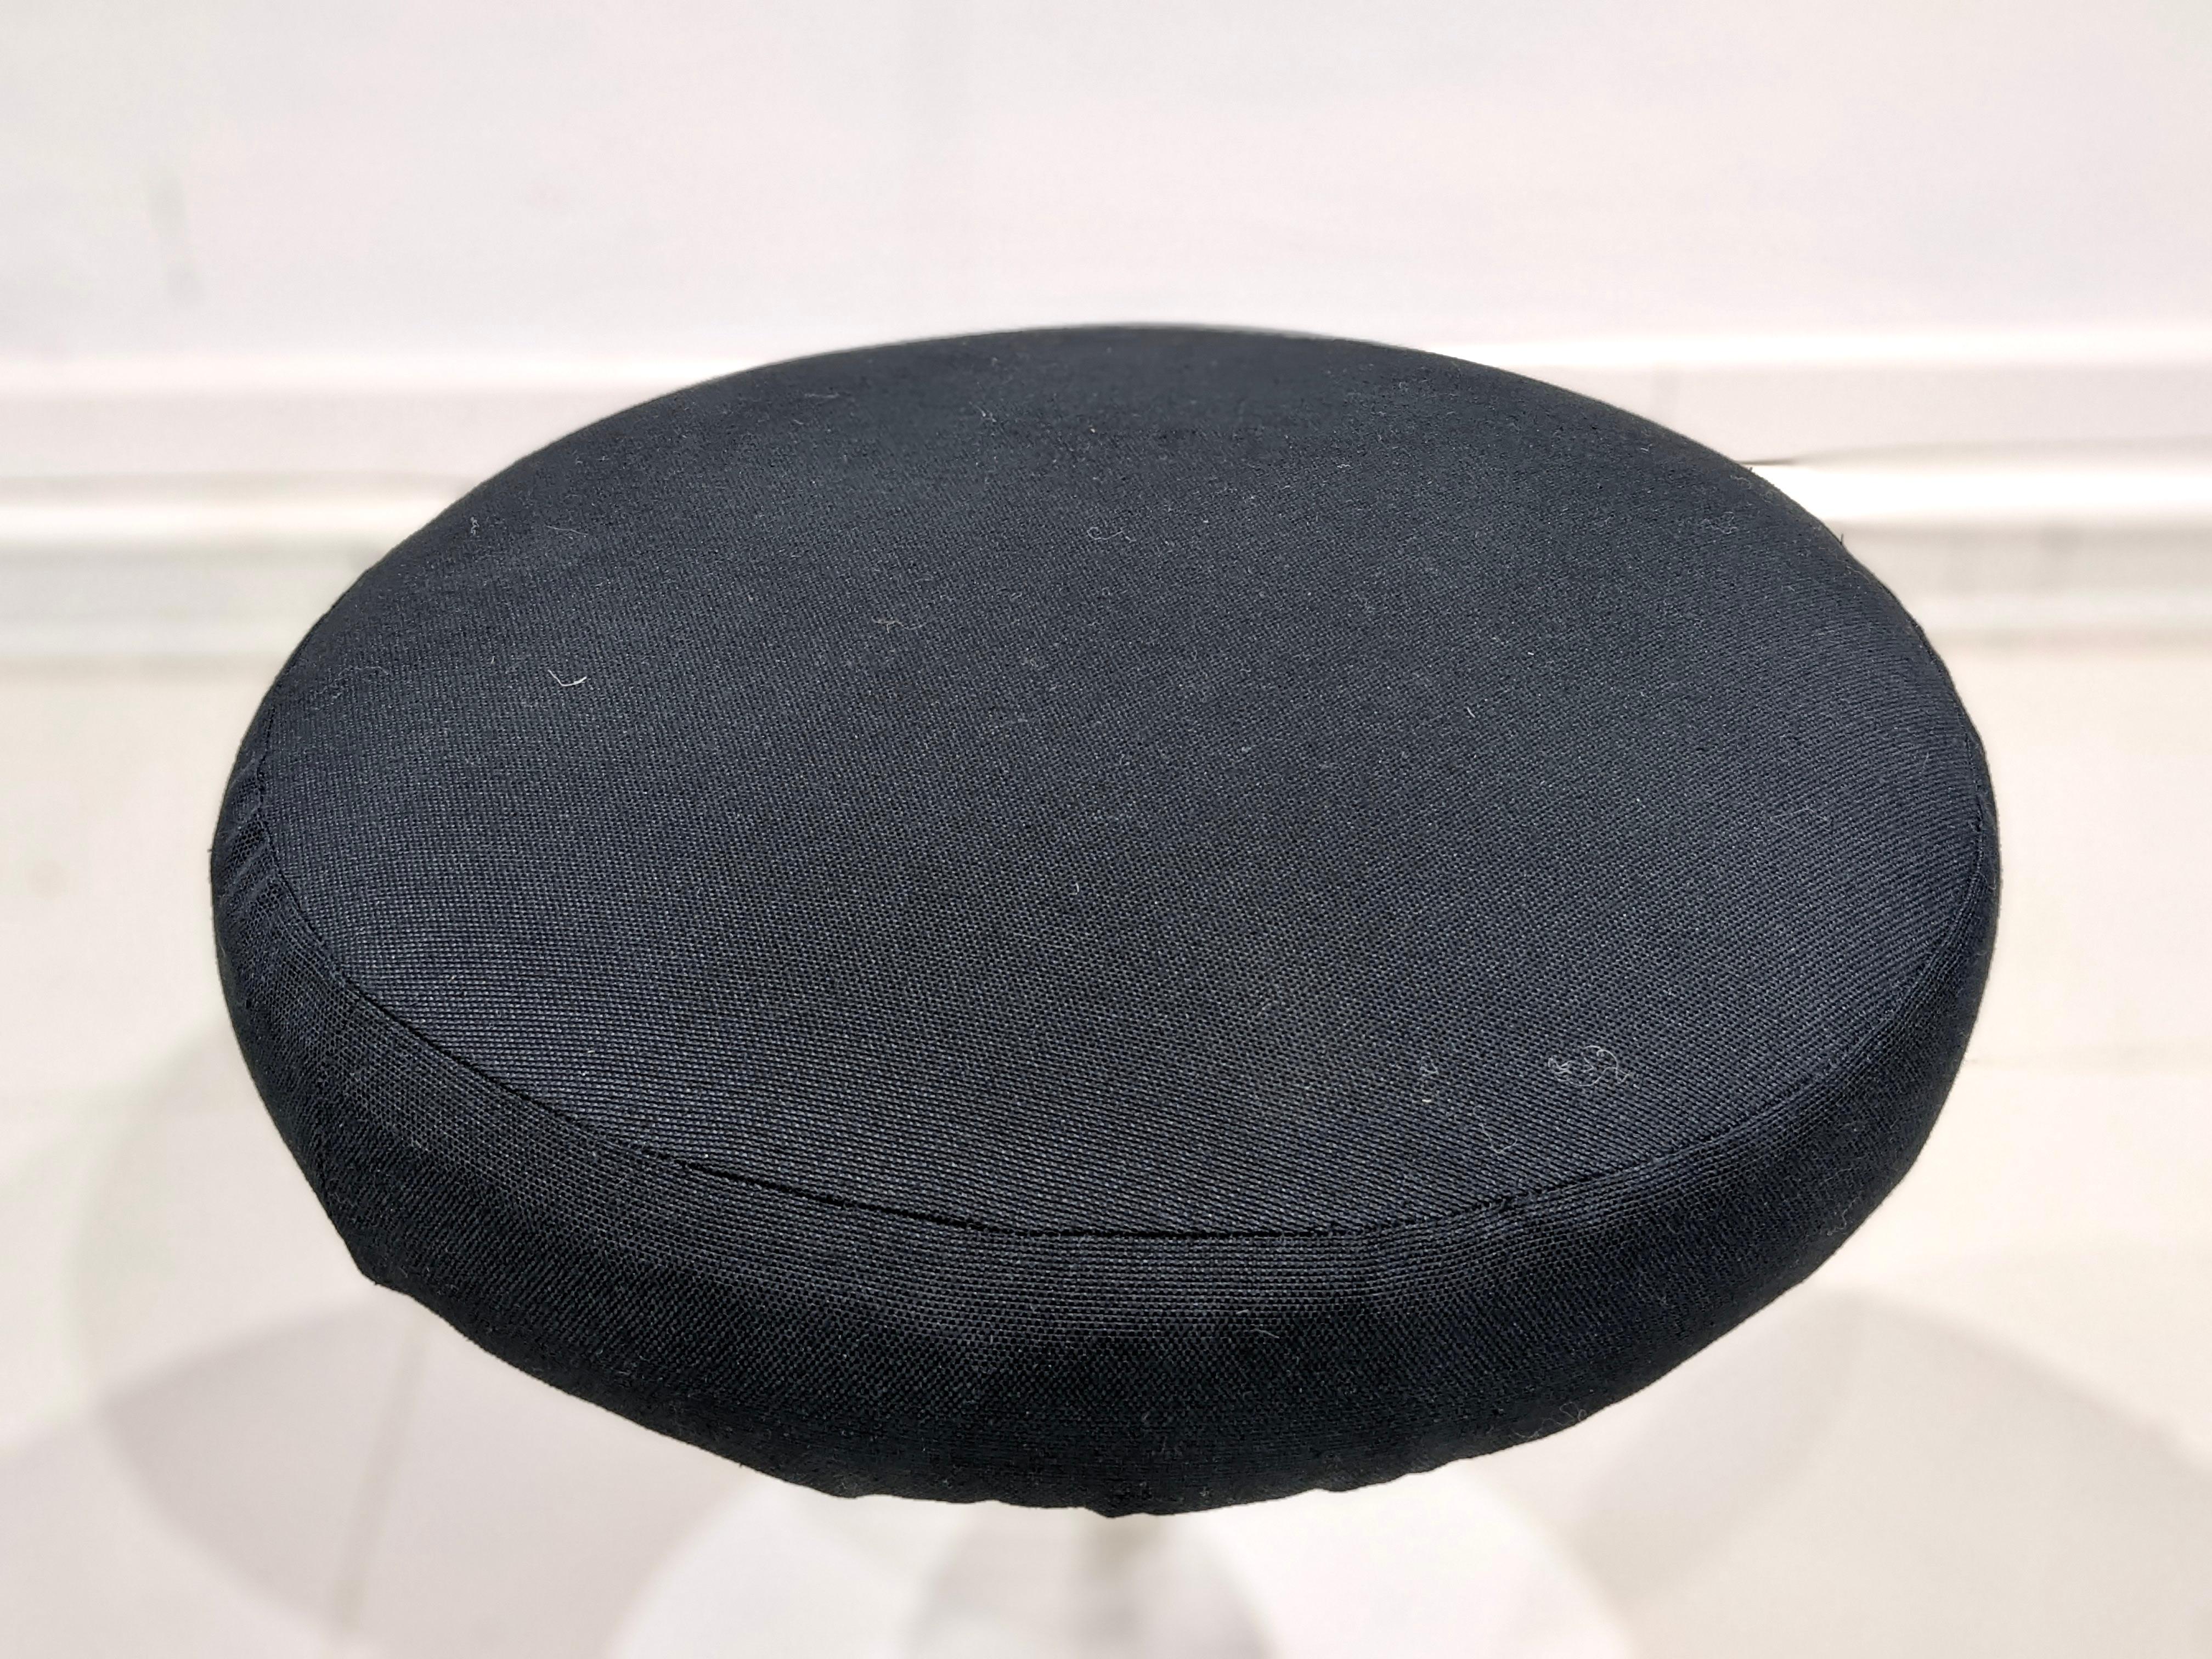 Swivel stool by Eero Saarinen for Knoll International 
Circa 1970. 
Good condition. 
White lacquered cast aluminium base. Seat in black fabric. 
Some wear on the base (see photo). 

Dimensions: H42 cm x D40 cm.